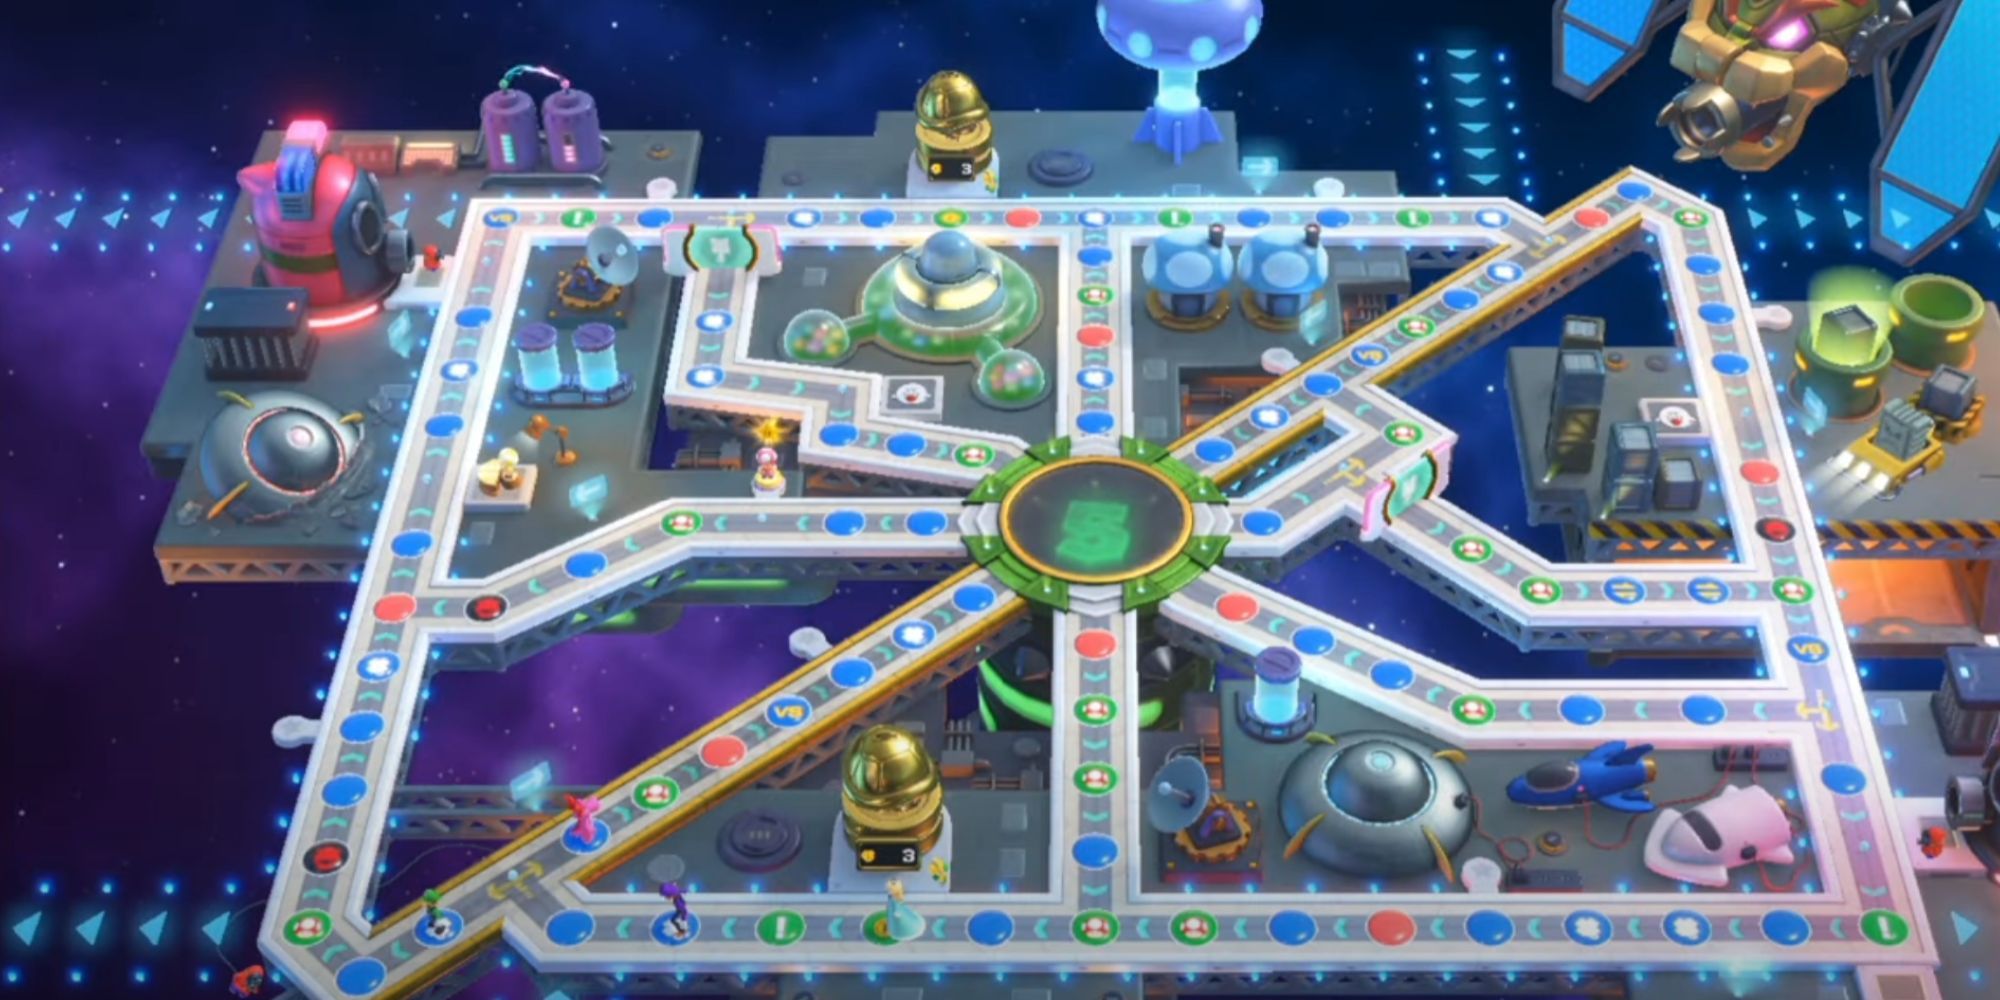 Sci fi themed Space Land board game from Mario Party Superstars